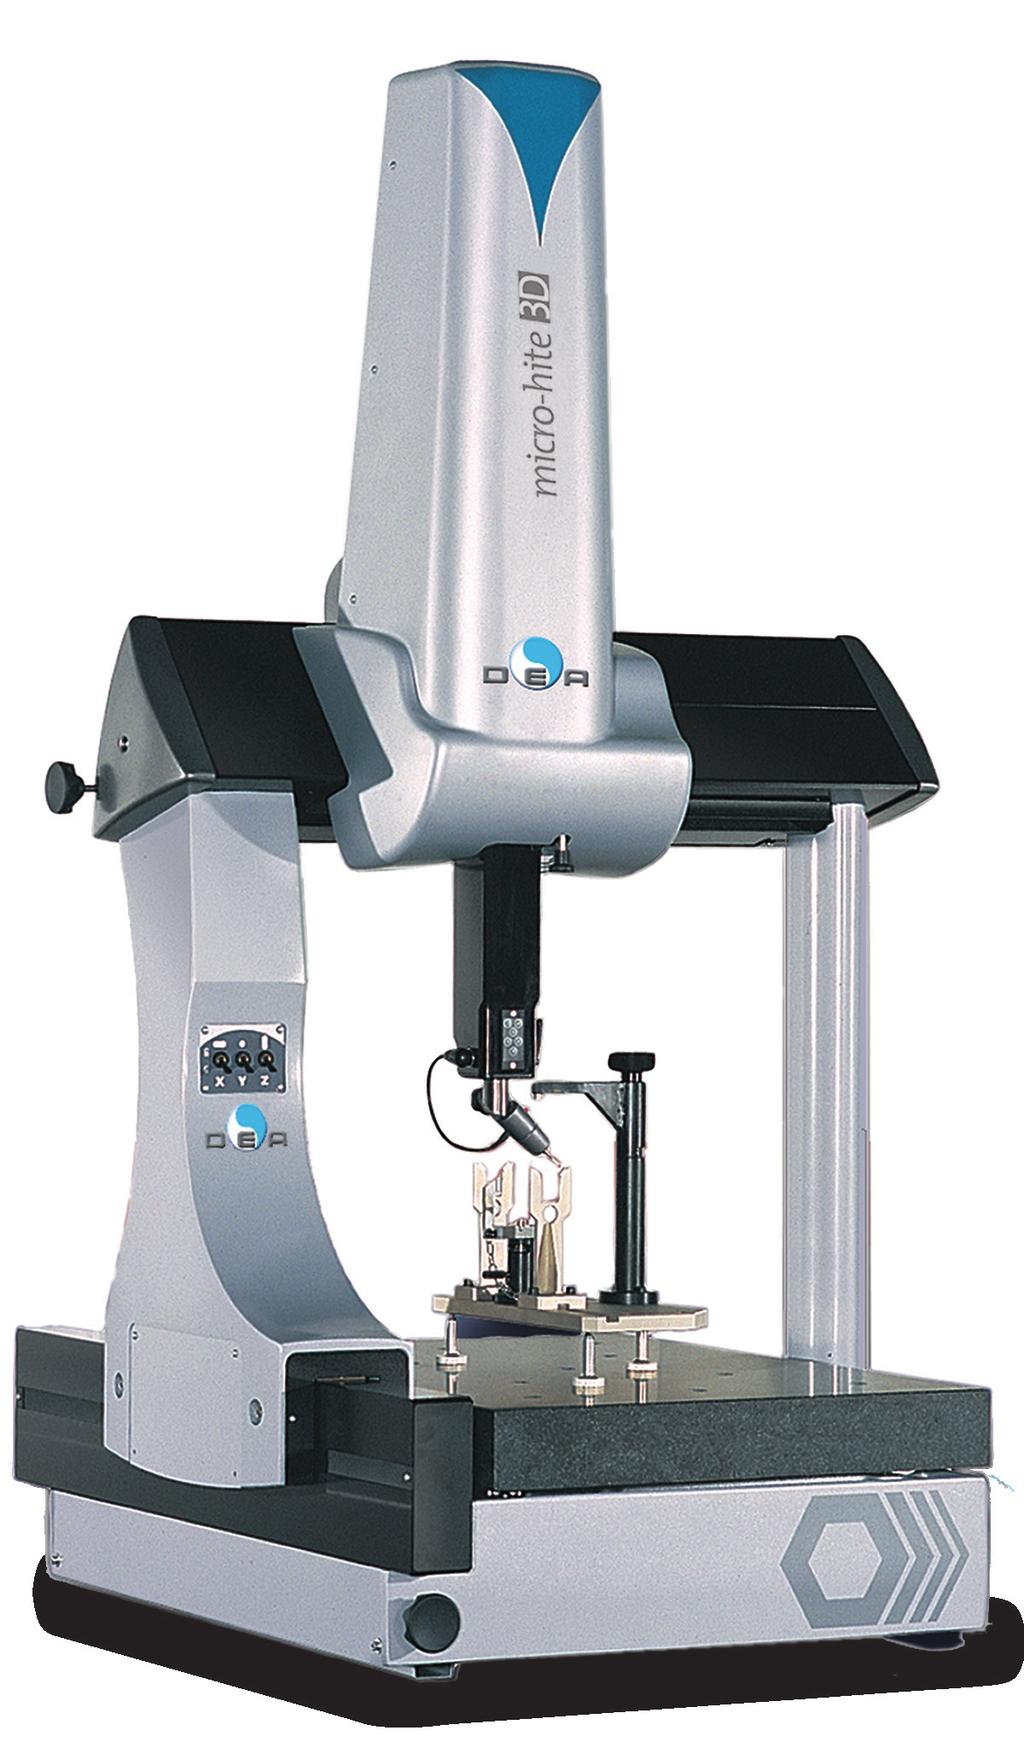 DEA MICRO-HITE Micro-Hite, the line of small CMMs featuring excellent performance, is the result of the synergy among Hexagon Metrology companies in research, design and manufacturing.